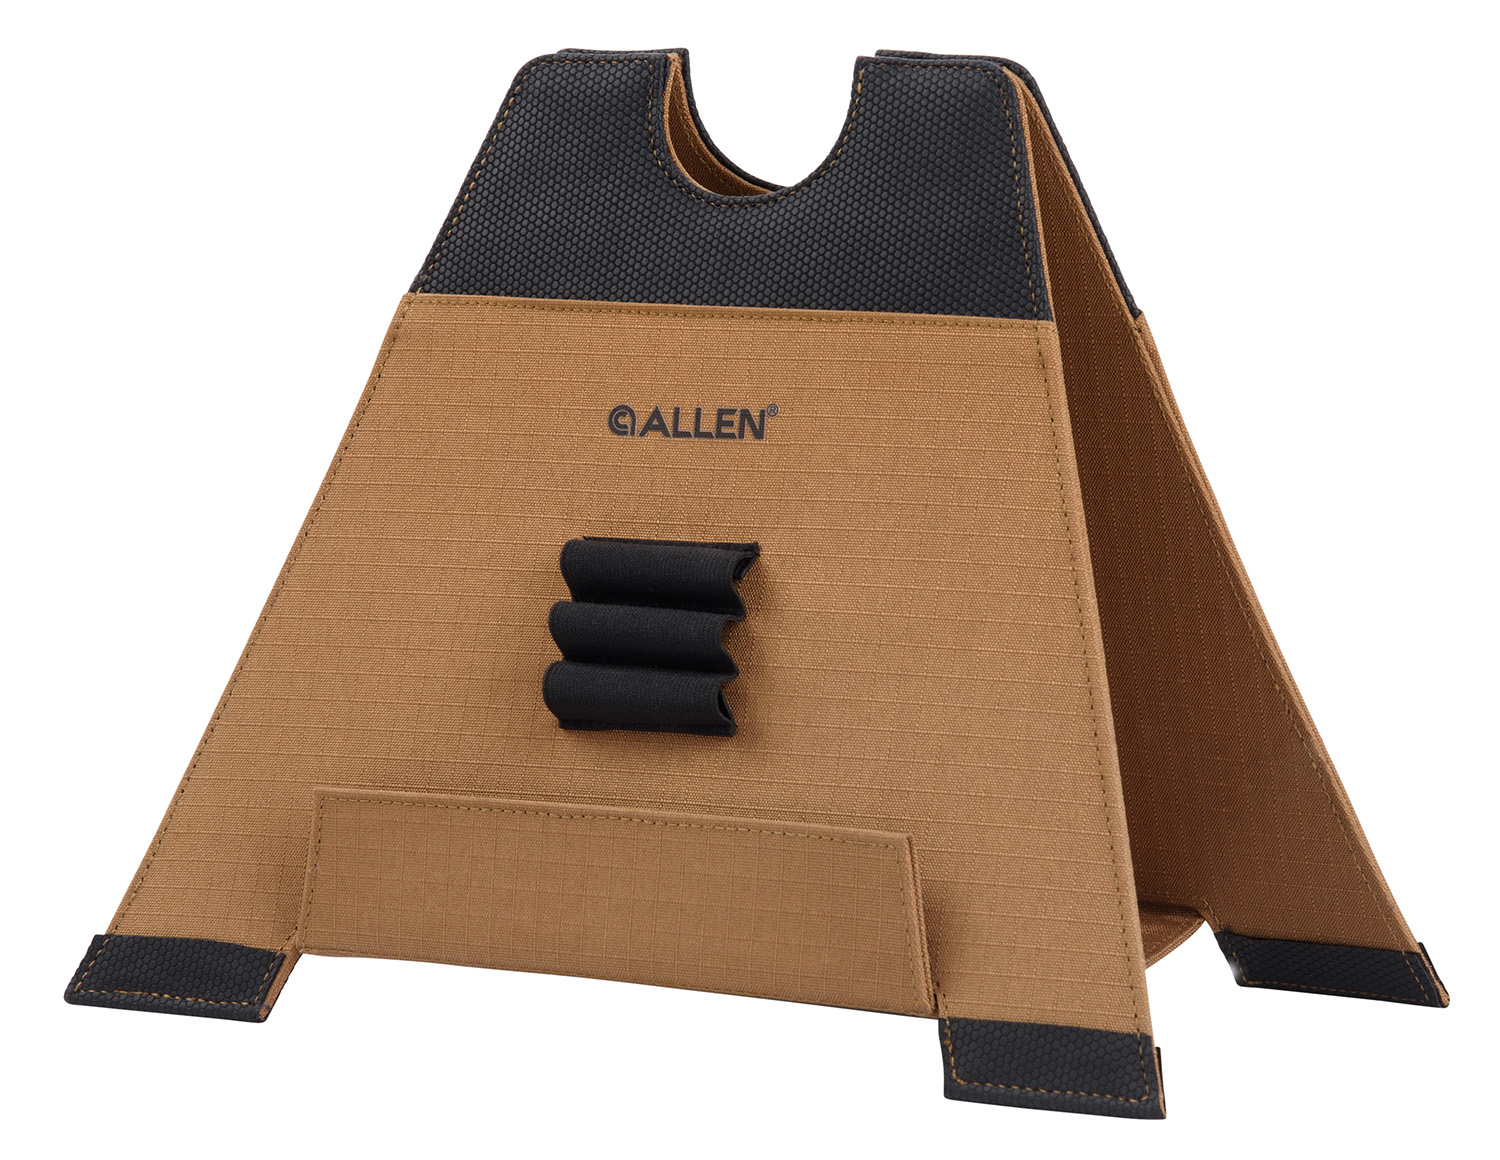 Allen 18414 X-Focus Shooting Rest made of Coyote Polyester with Black Accents, Foldable Design, weighs 1.26 lbs & 12